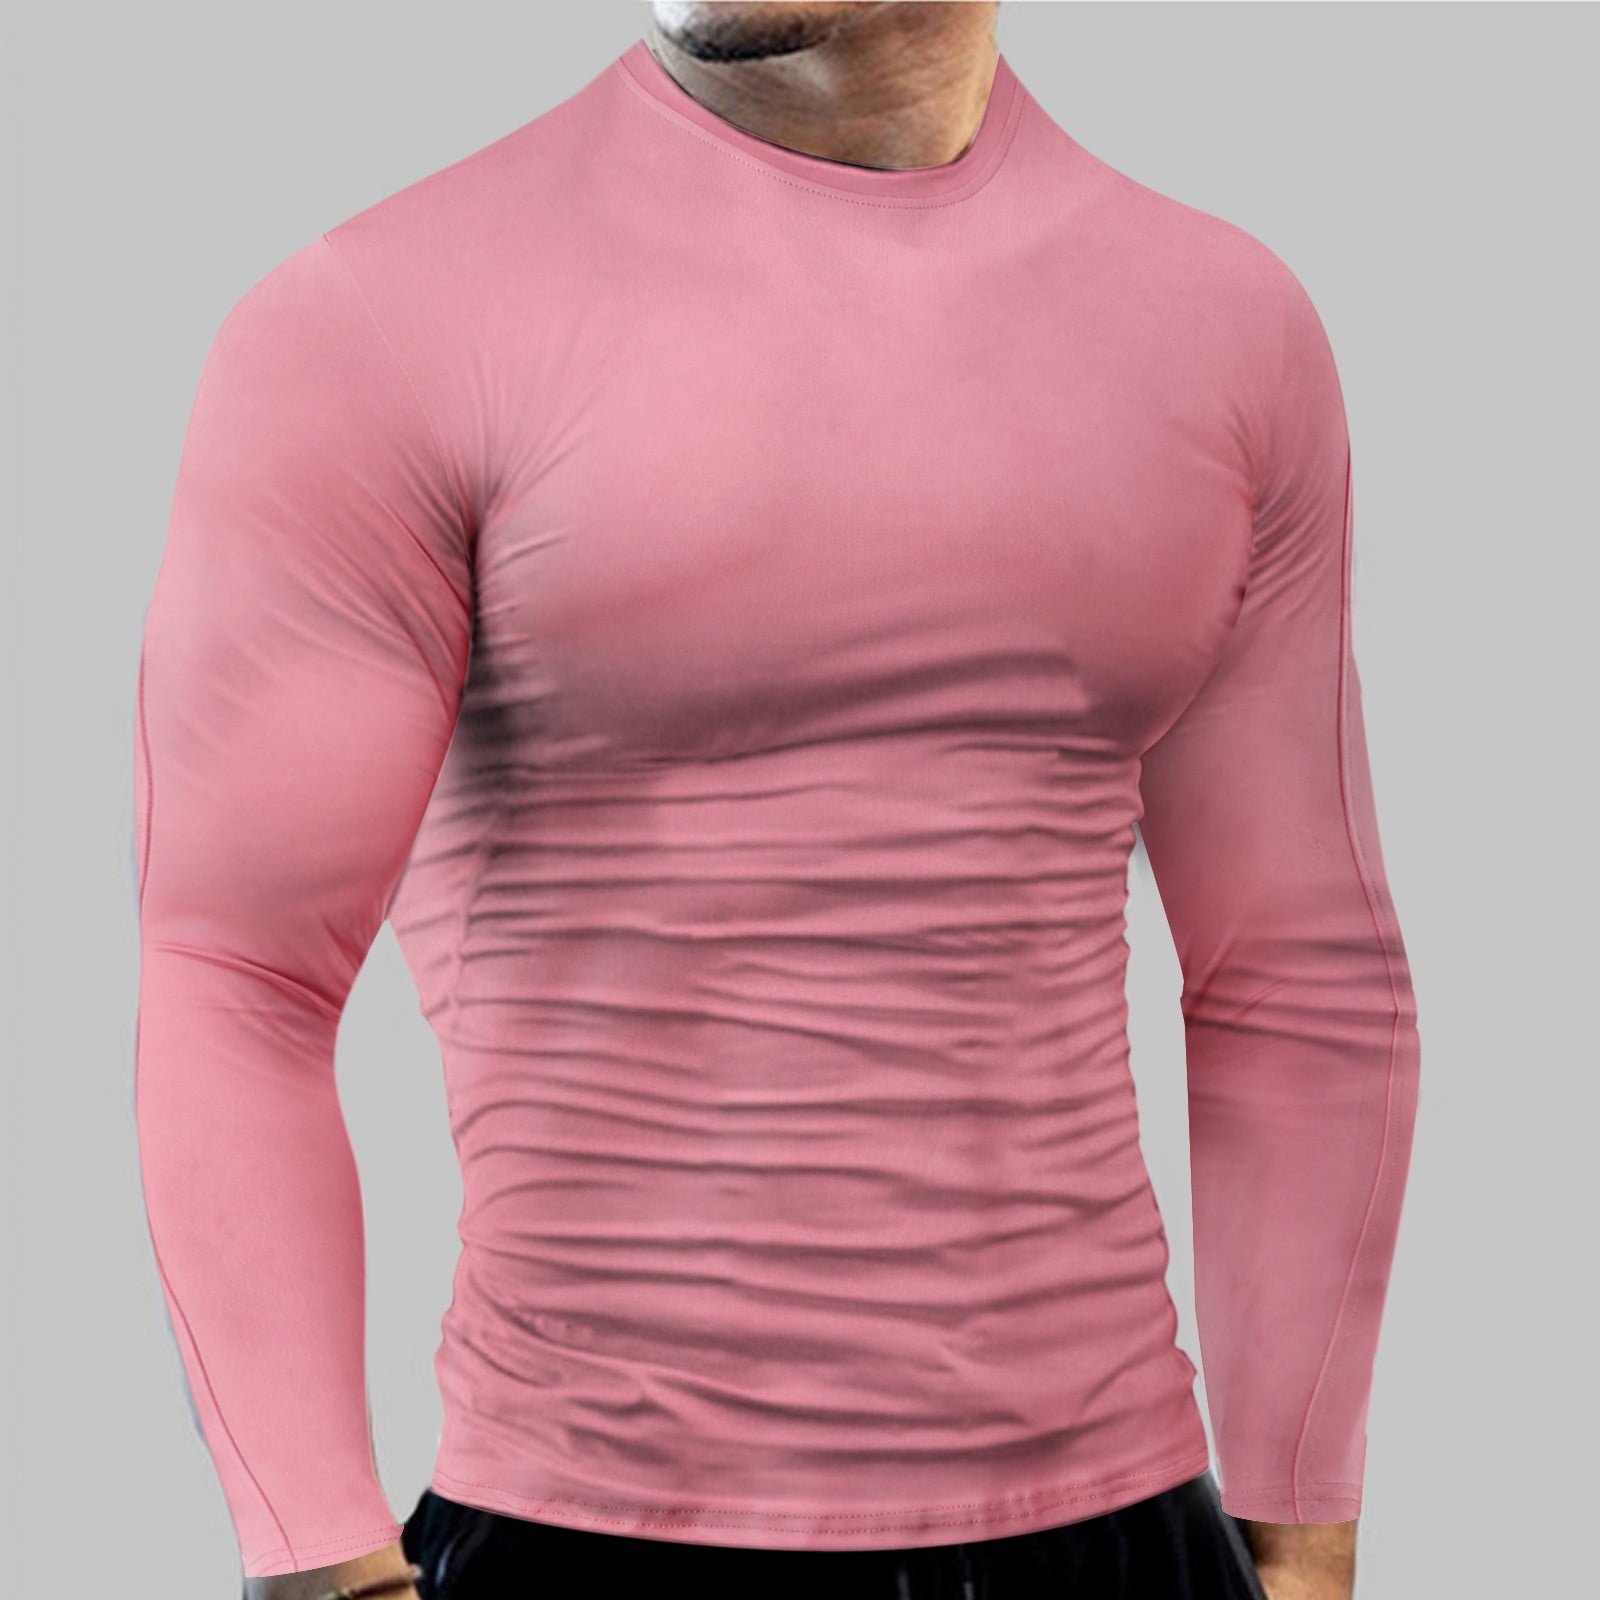 Pink Compression Shirts For Men Male Spring And Summer Fitness